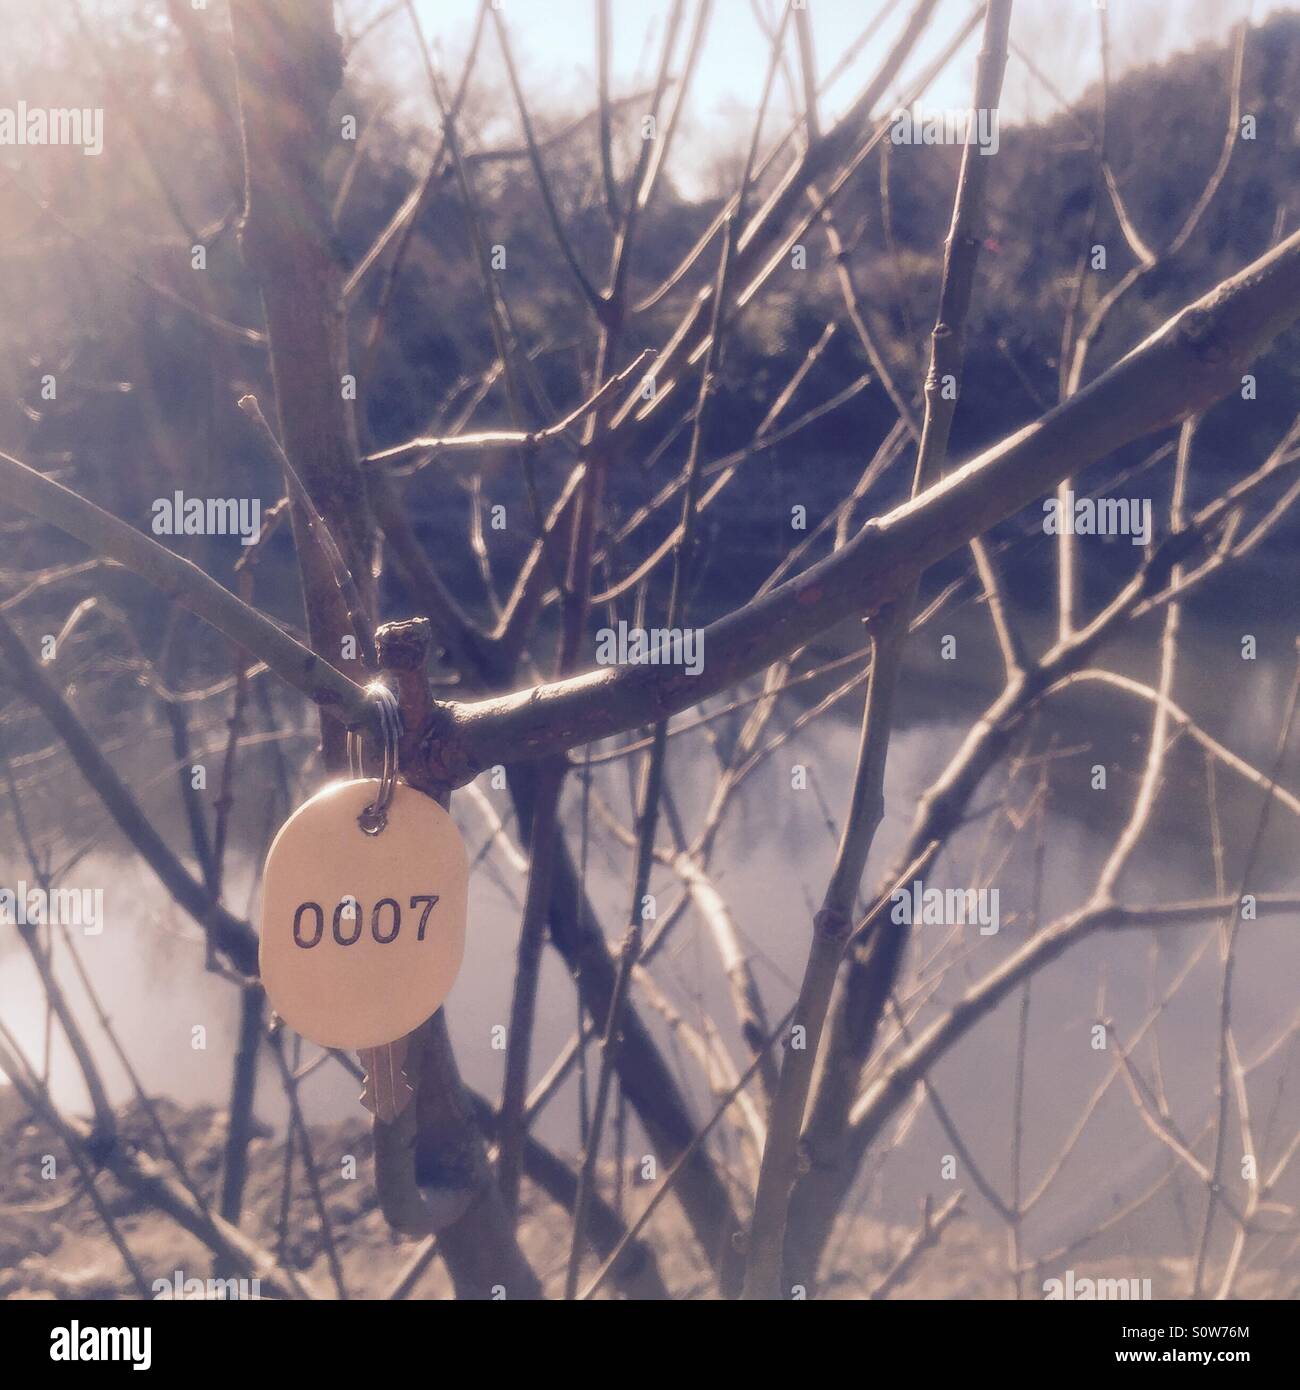 A stainless steel key on simple white oval keychain with the numbers 0007, hanging on a tree branch by the pond in winter. Vintage film tone. Stock Photo